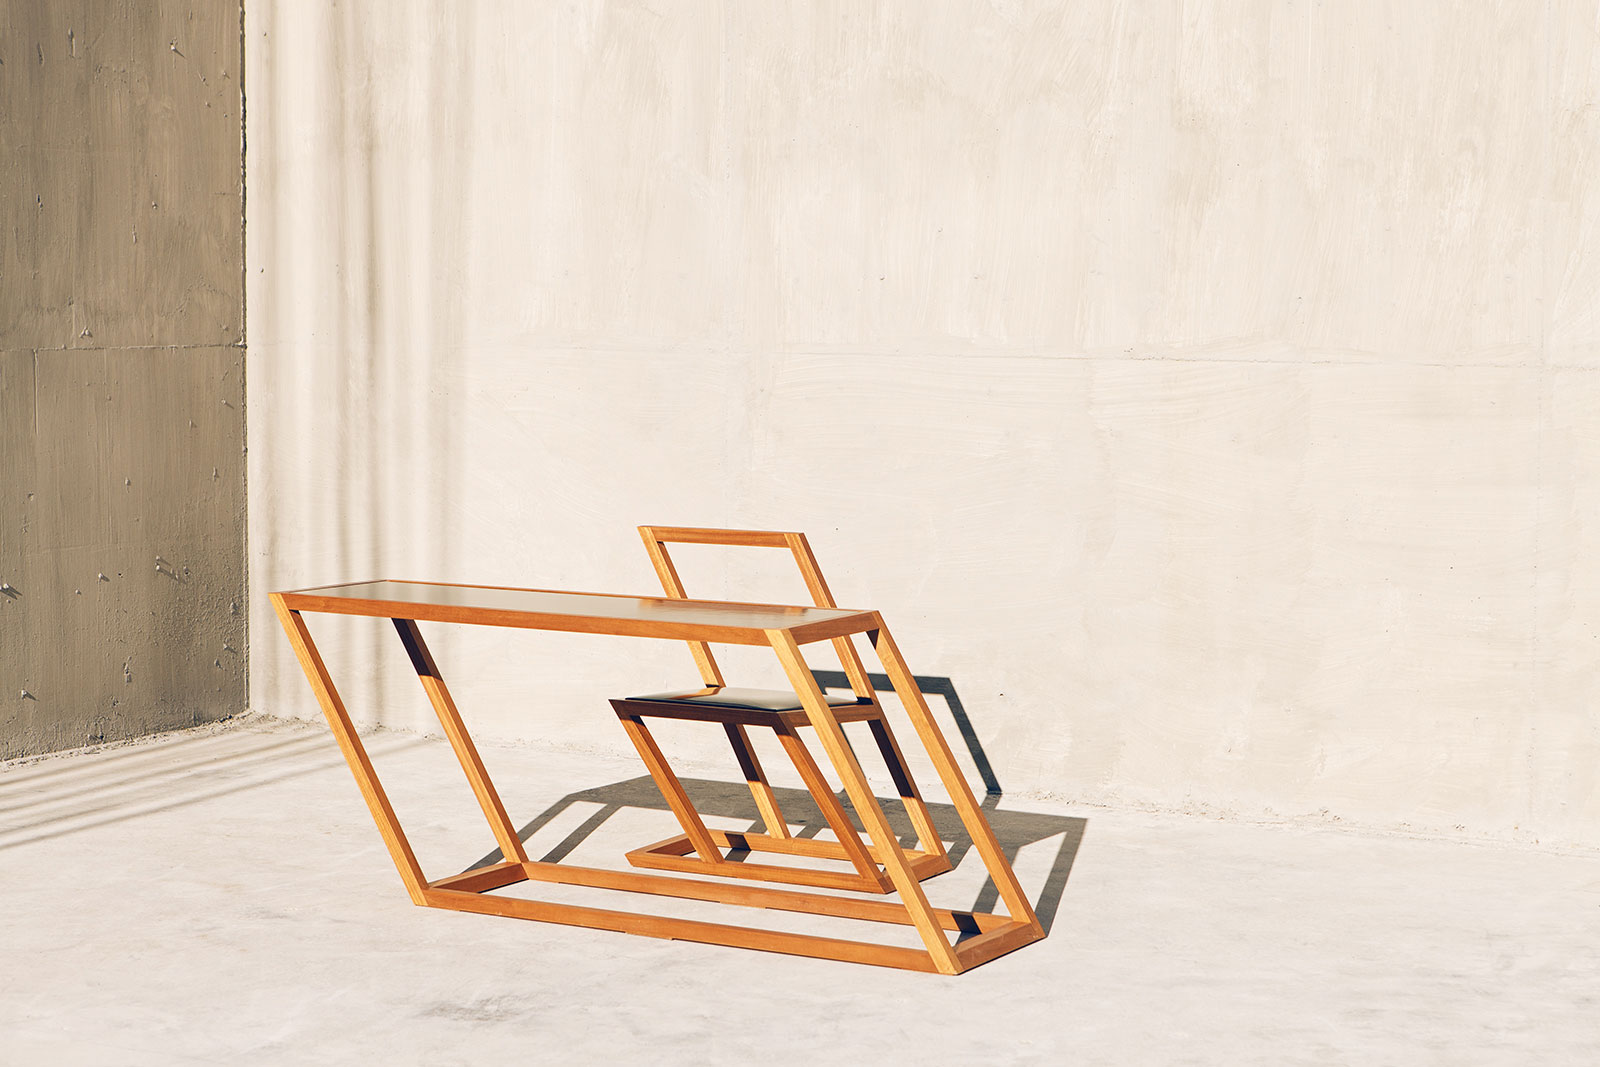 leaning furniture collection by xyz integrated architecture b